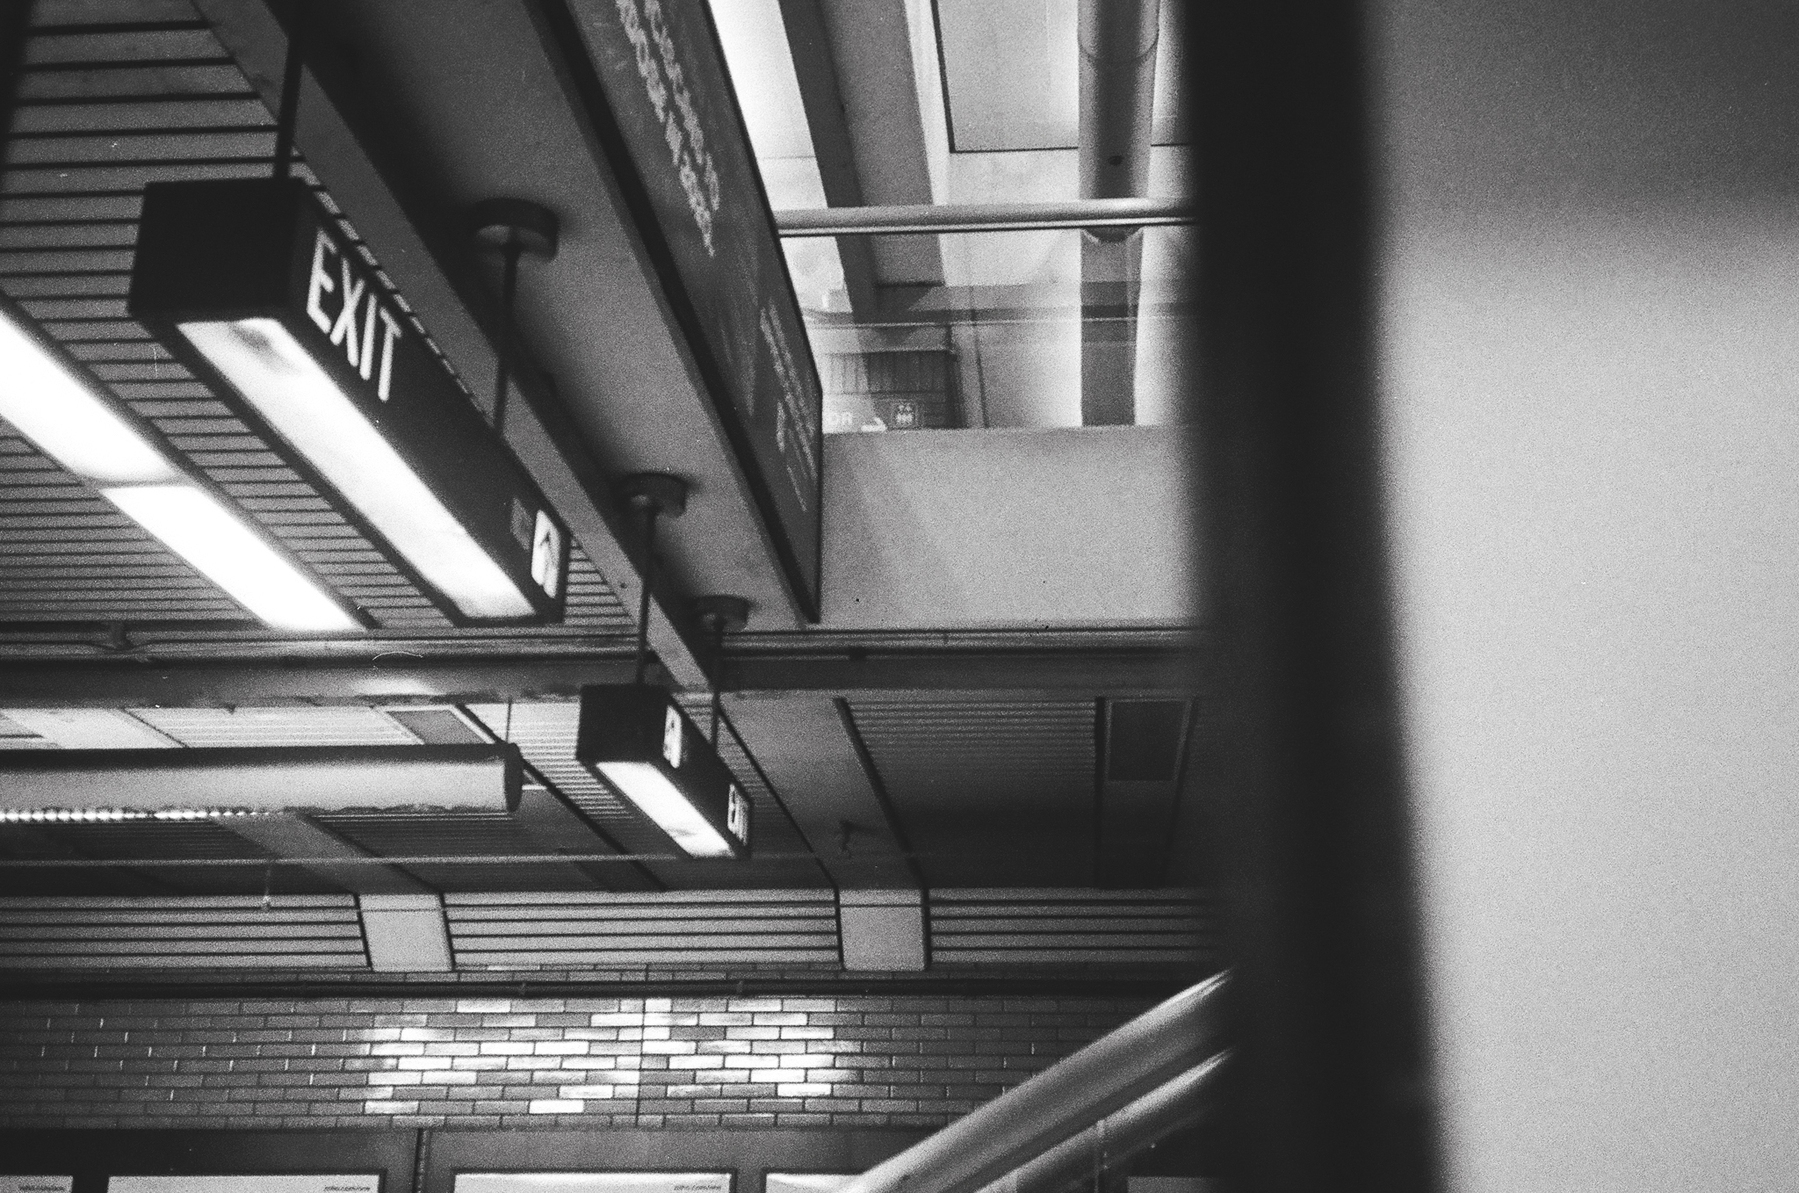 a scan of a black and white photograph of a train station signs and lights from inside a train